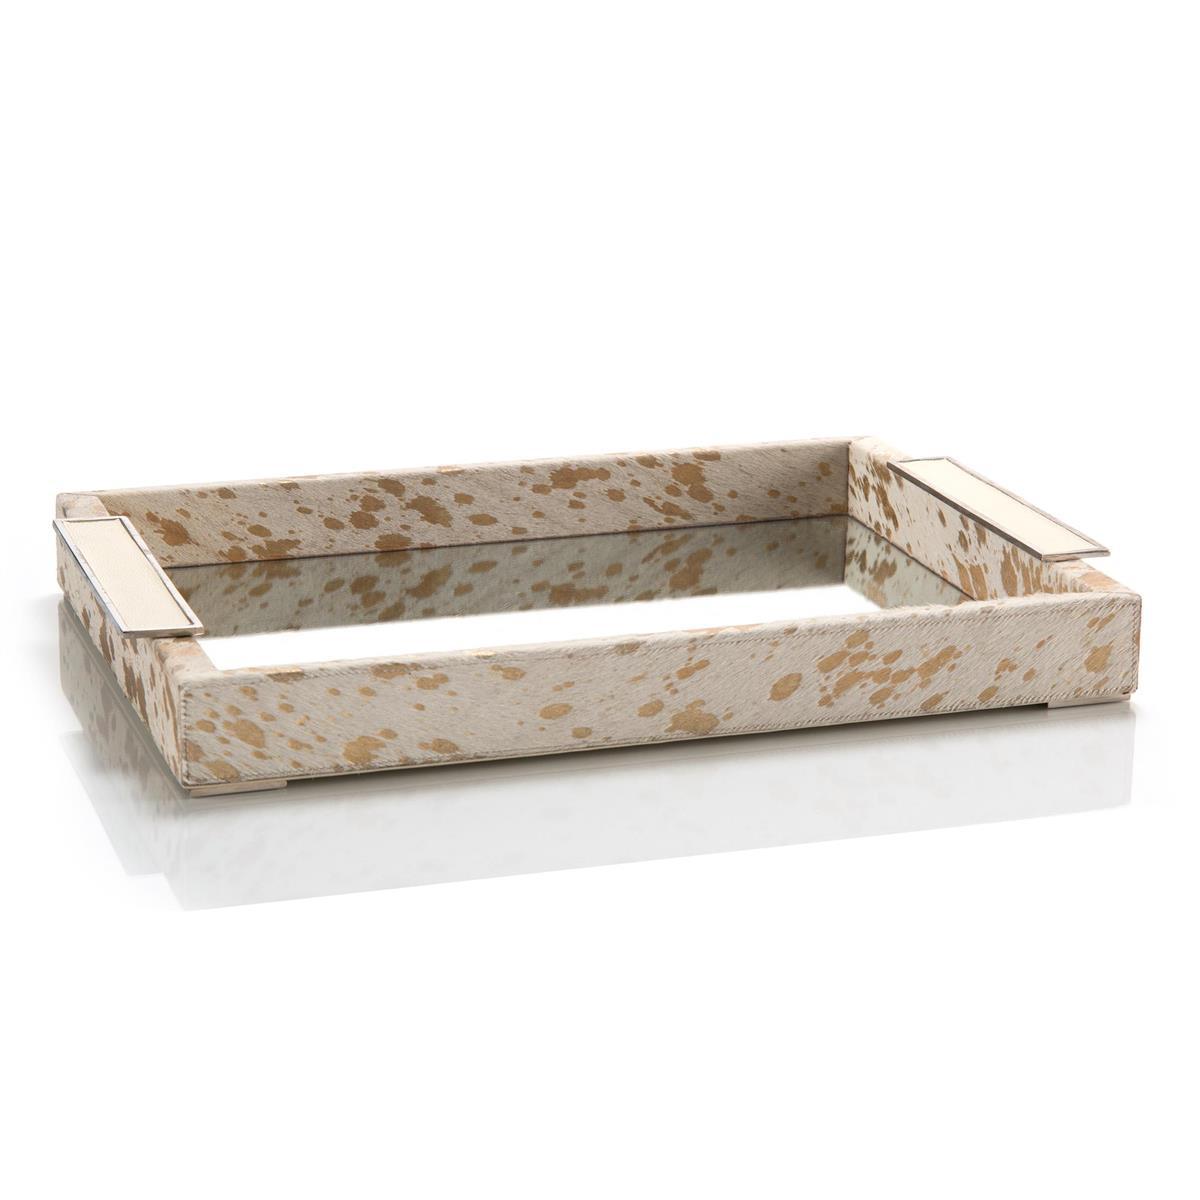 Cream and Gold Hide Mirrored Tray-John Richard-Trays-Artistic Elements